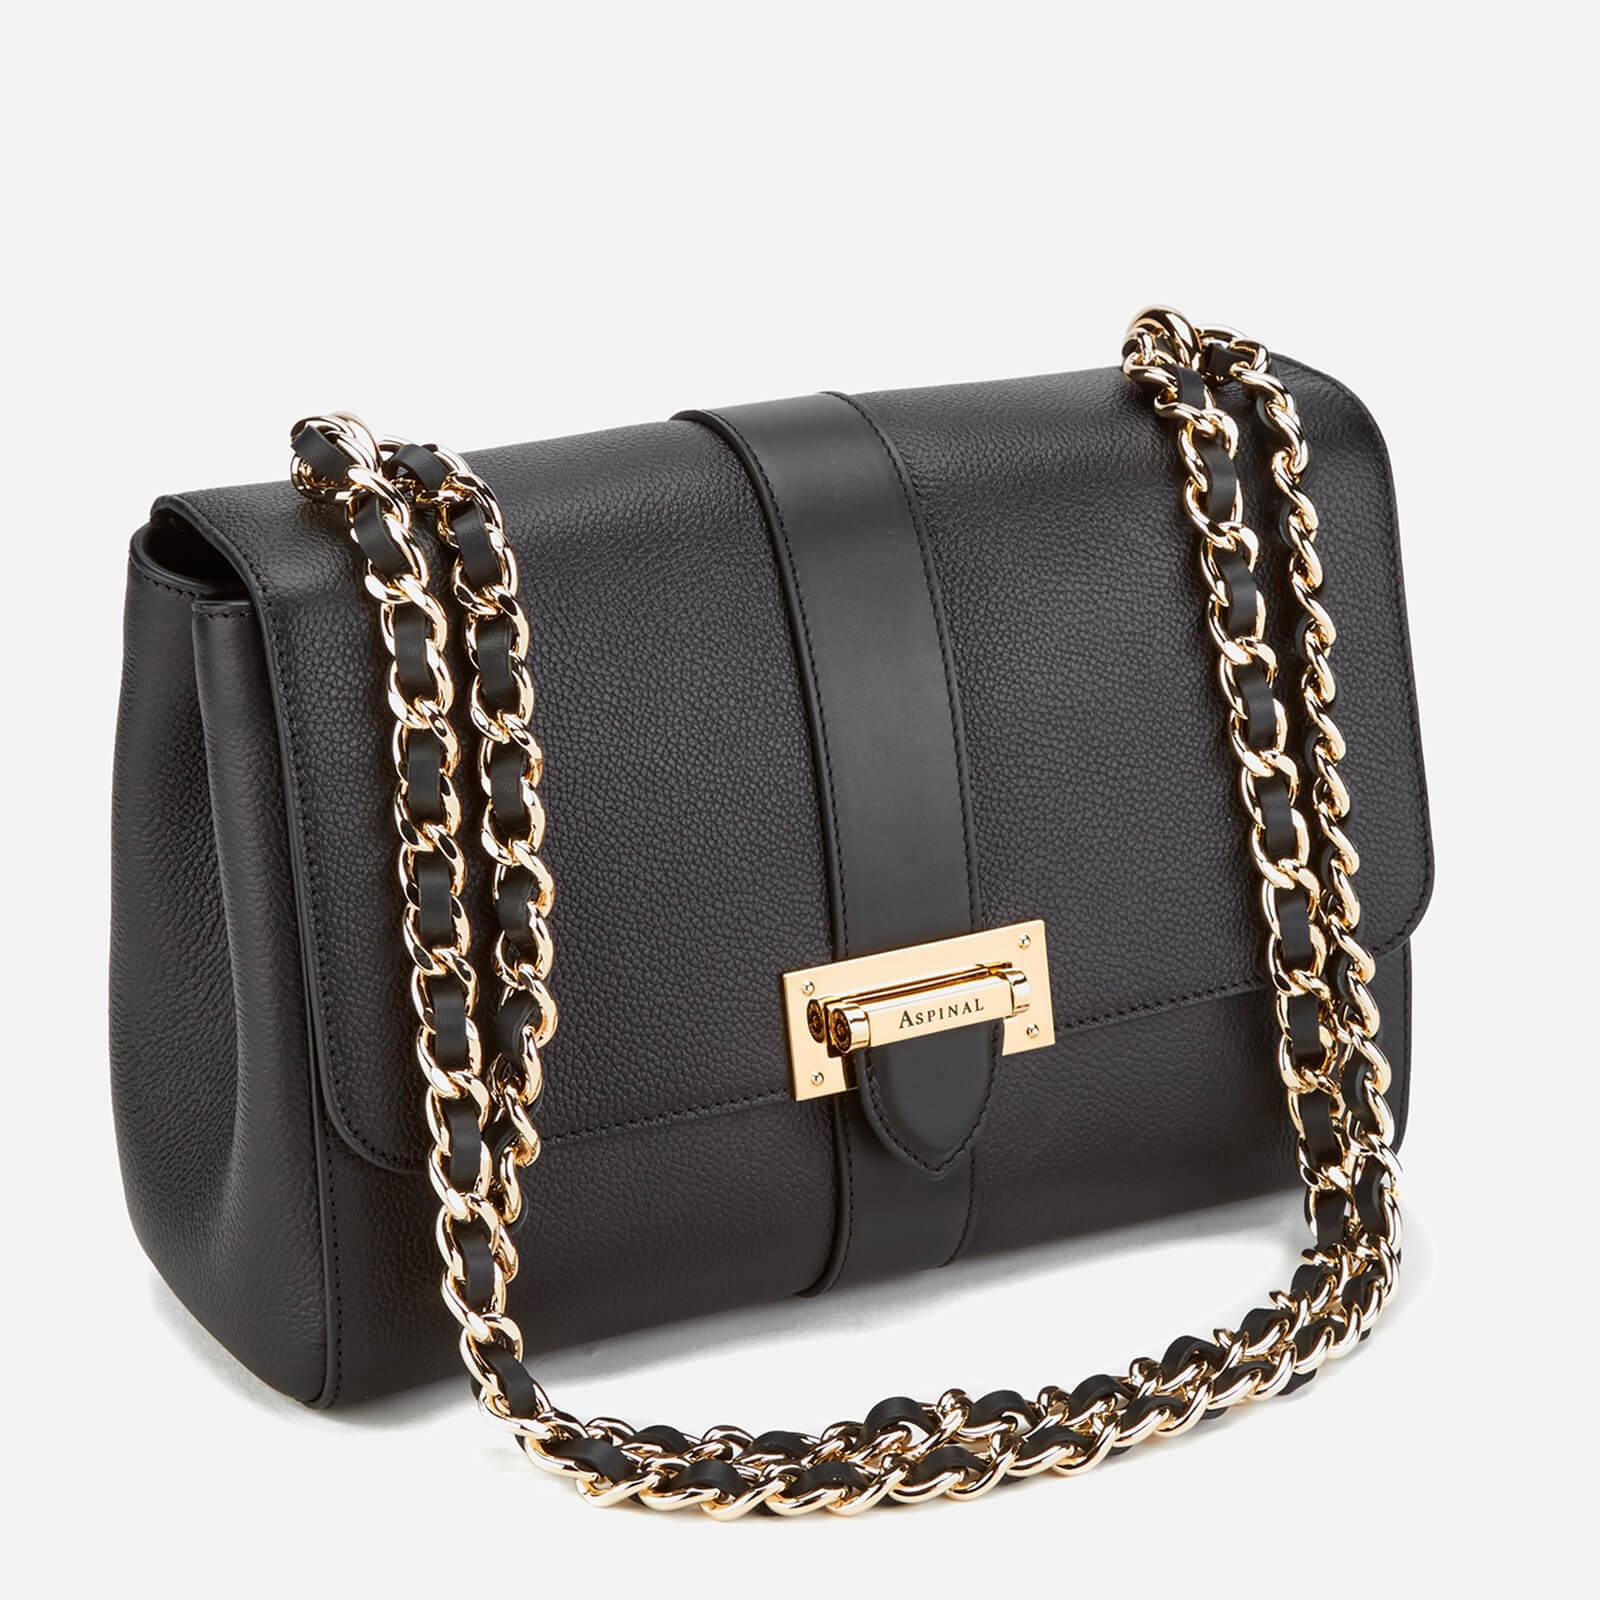 Aspinal of London Lottie Large Bag - Lyst